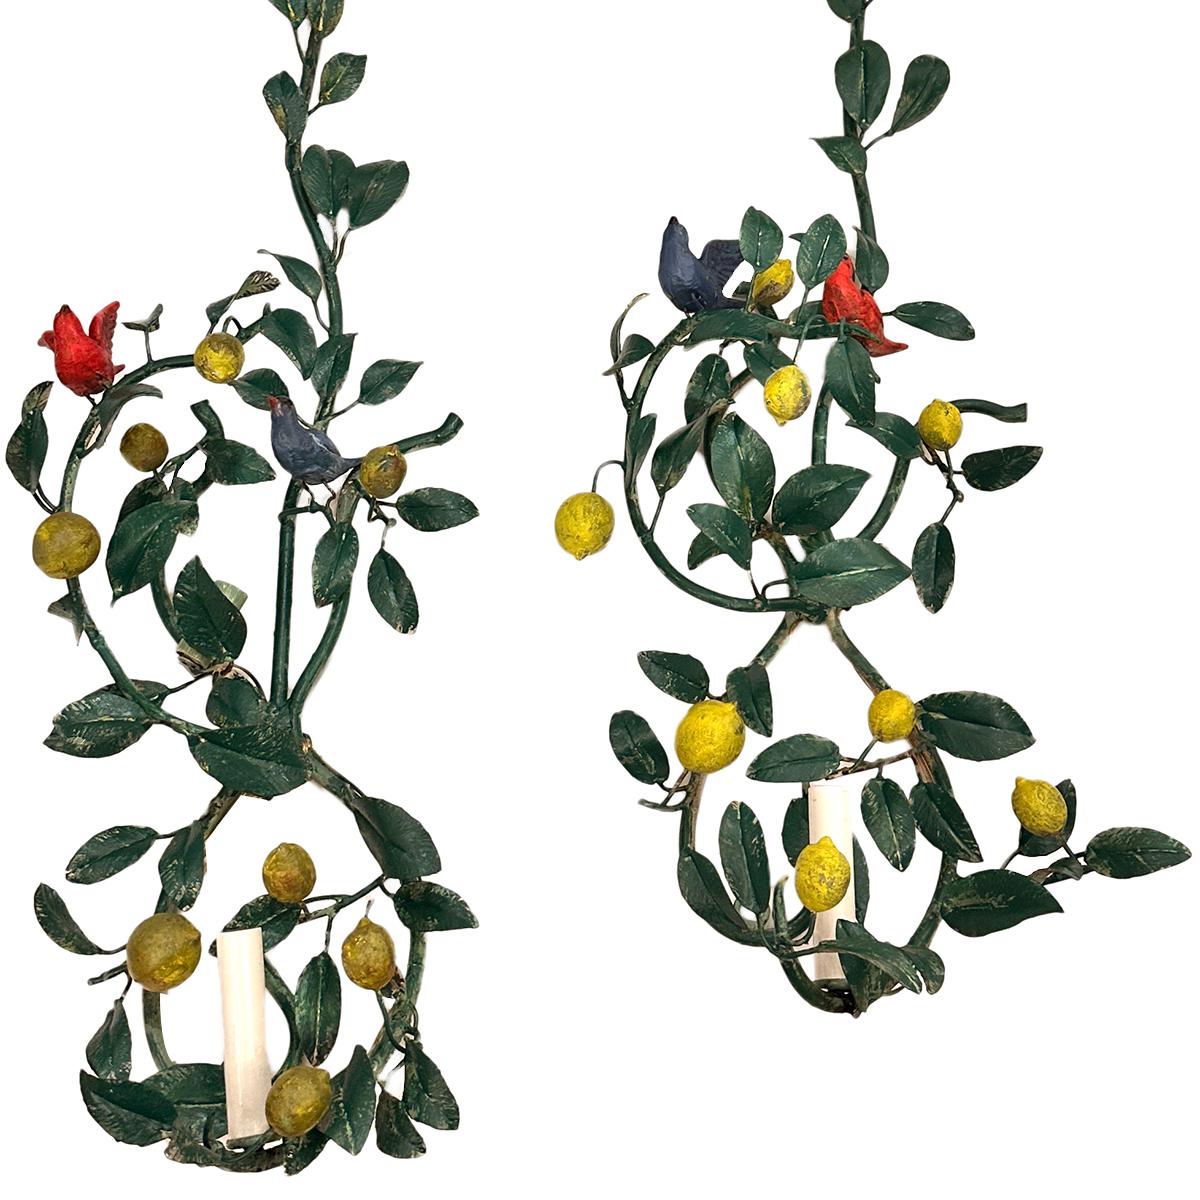 Pair of 1940's Italian tole sconces with painted foliage and birds.

Measurements:
Height: 50